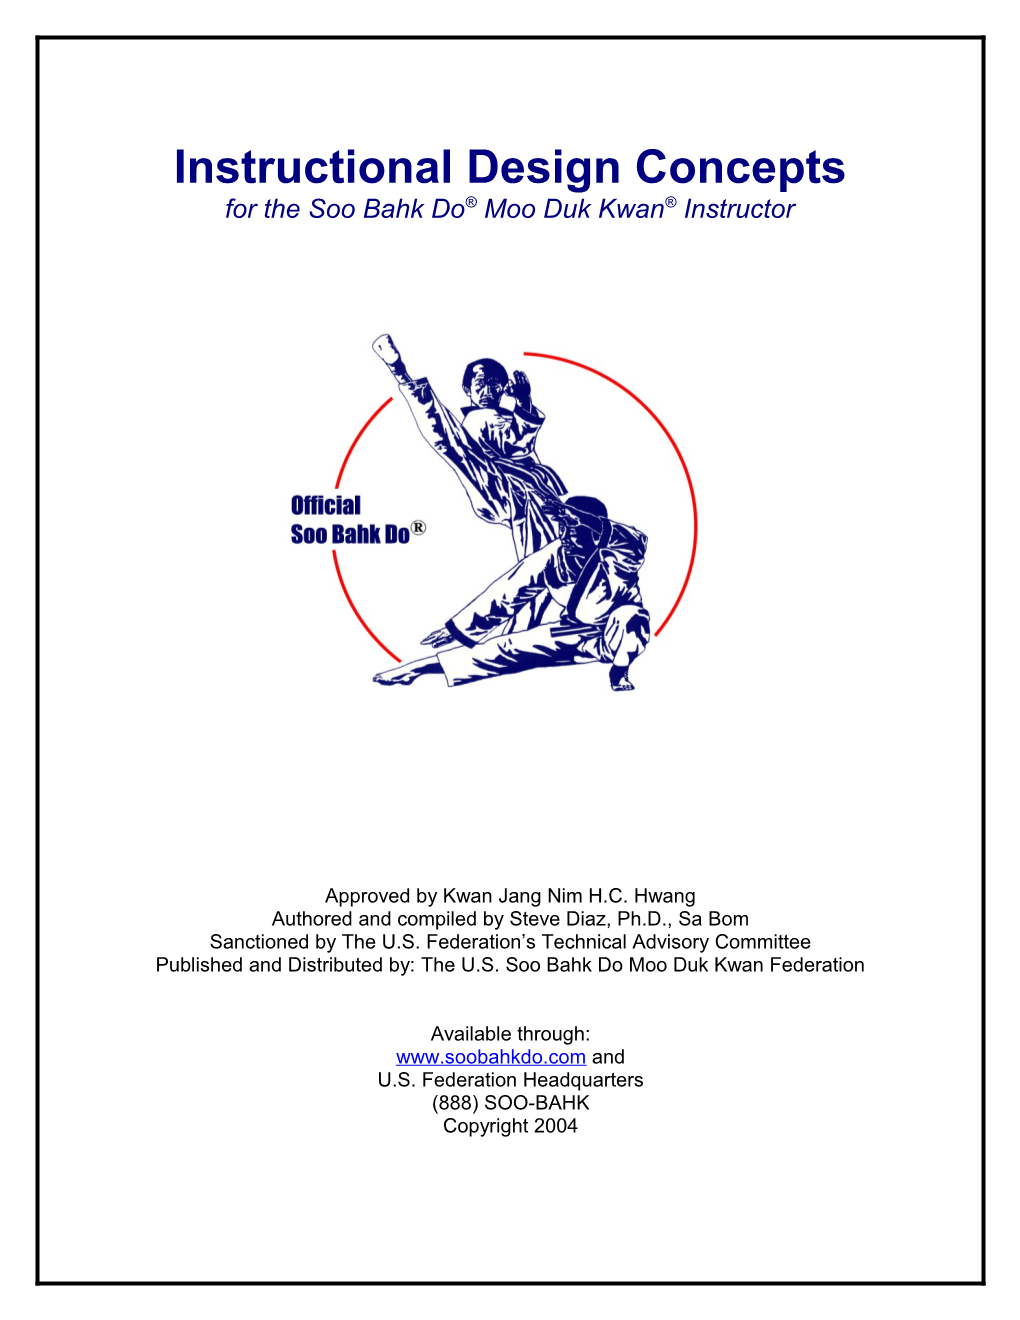 Instructional Design for the Soo Bahk Do Moo Duk Kwan Instructor